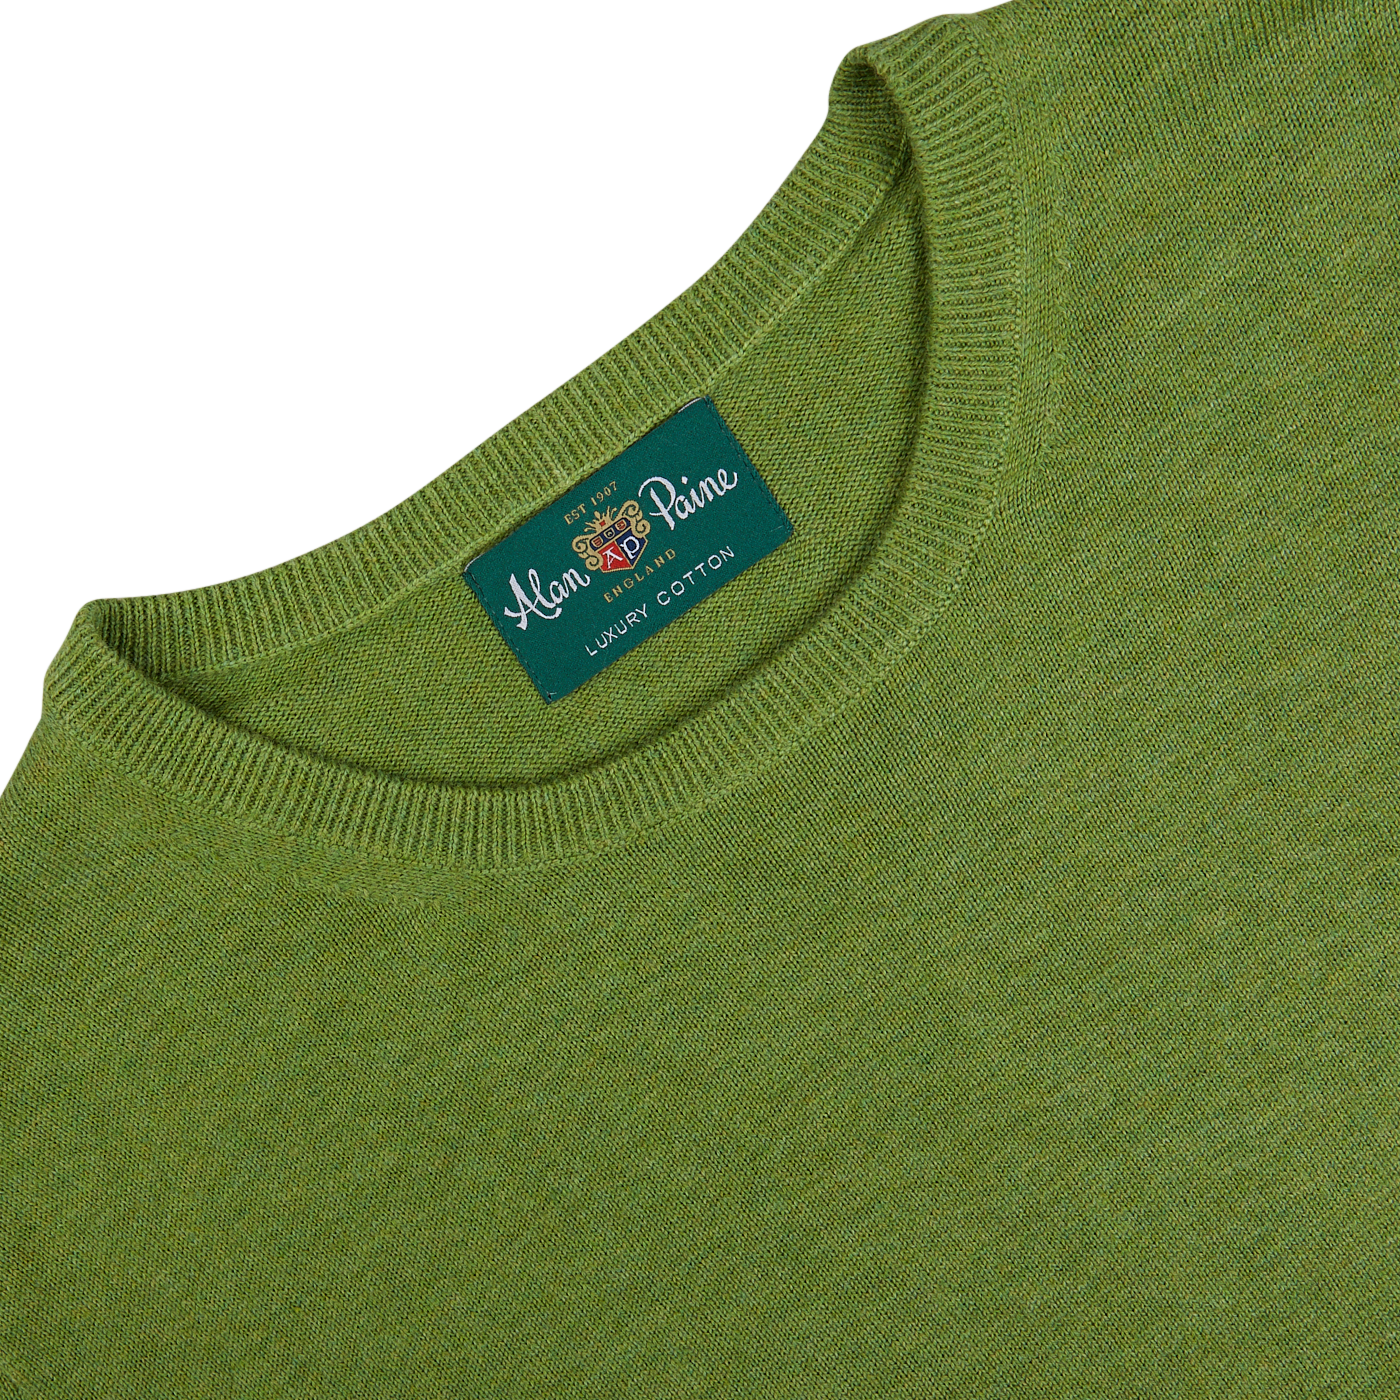 Avocado Green Luxury Cotton Crewneck sweater with a label showing the brand "Alan Paine - London estd 1975.